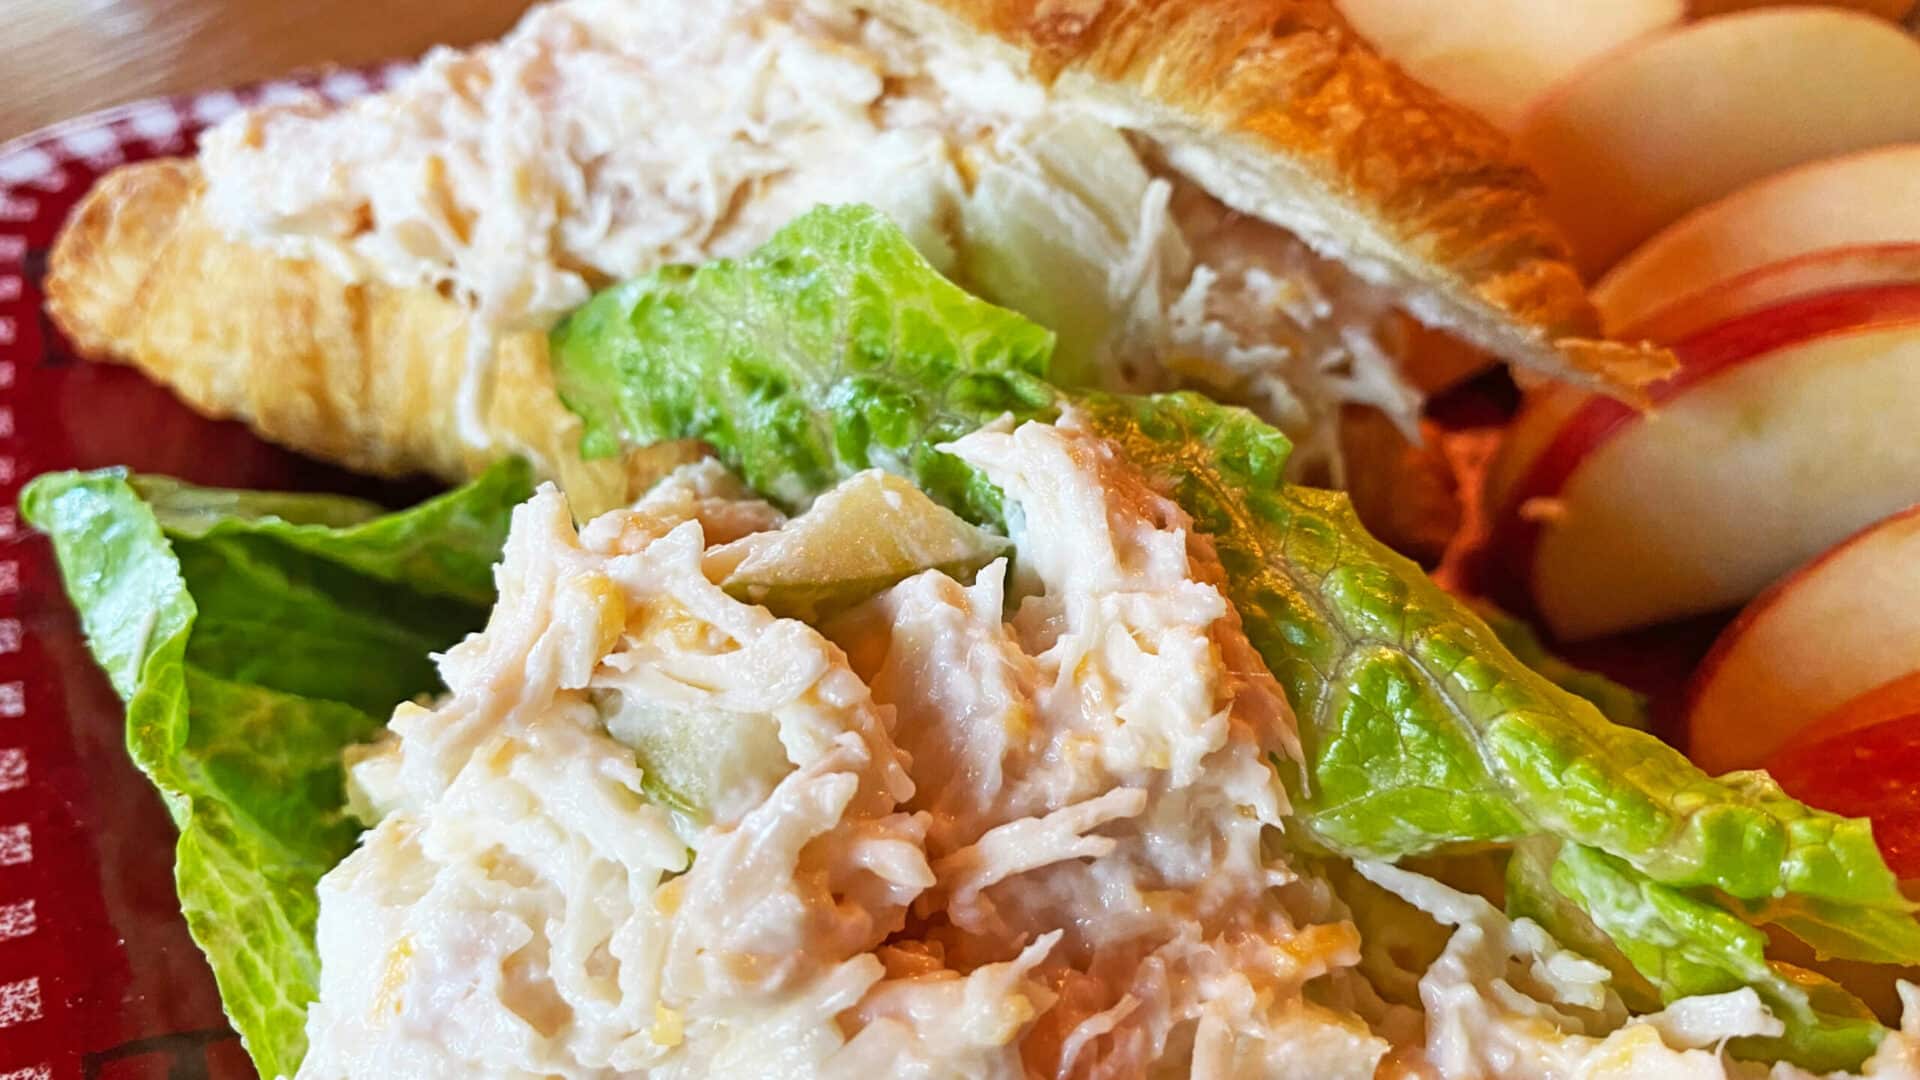 Chicken Salad with sliced applies